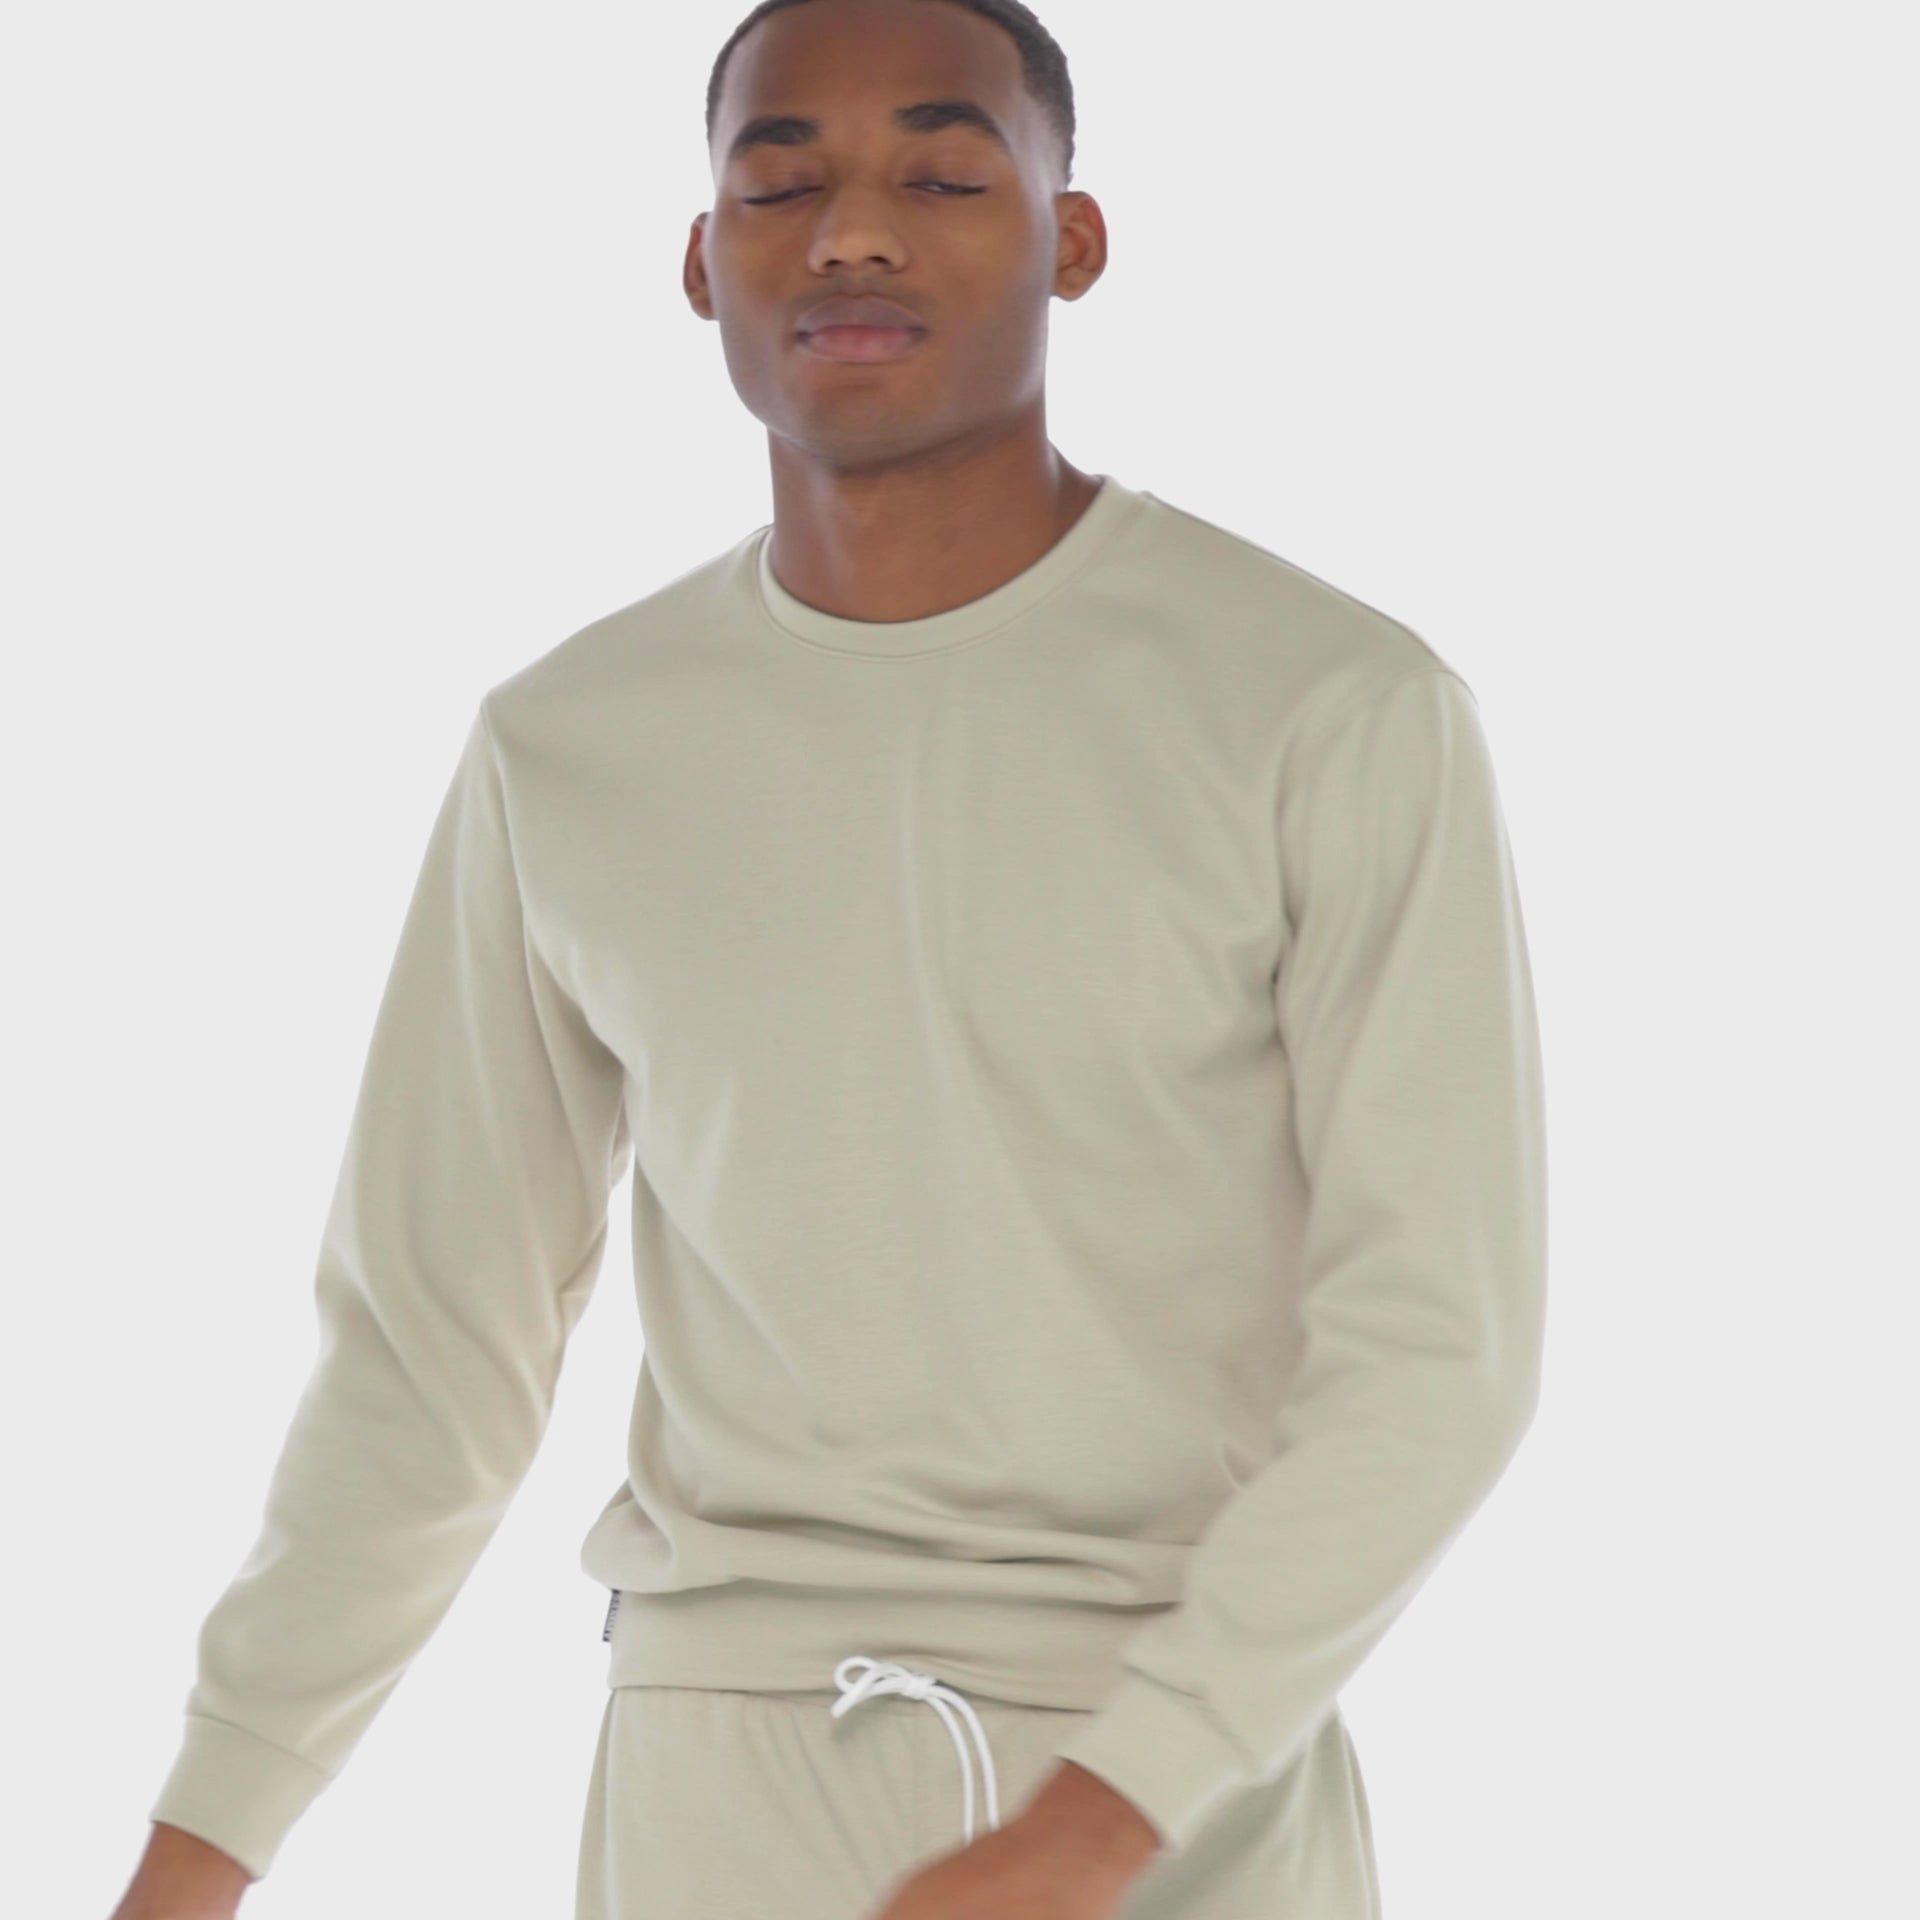 A WHITE WALL VIDEO OF A MALE MODEL WEARING THE SAMMY SHOP UNISEX SAND EVERYDAY CREW SWEATSHIRT